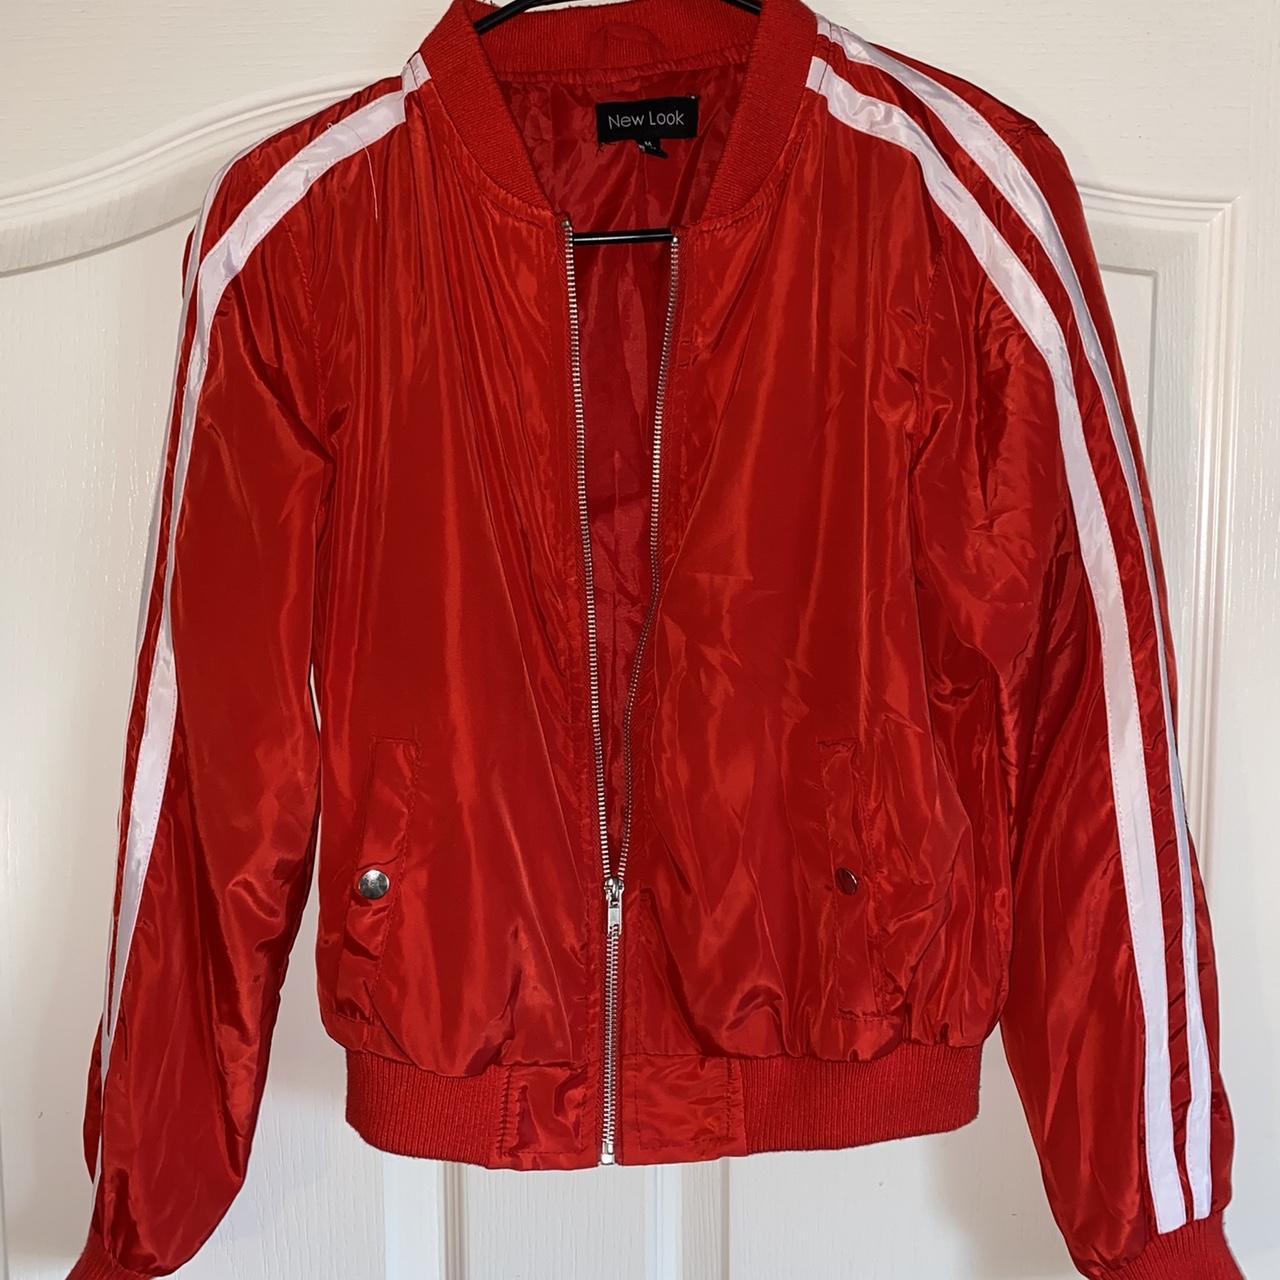 New Look Women's Red and White Jacket | Depop